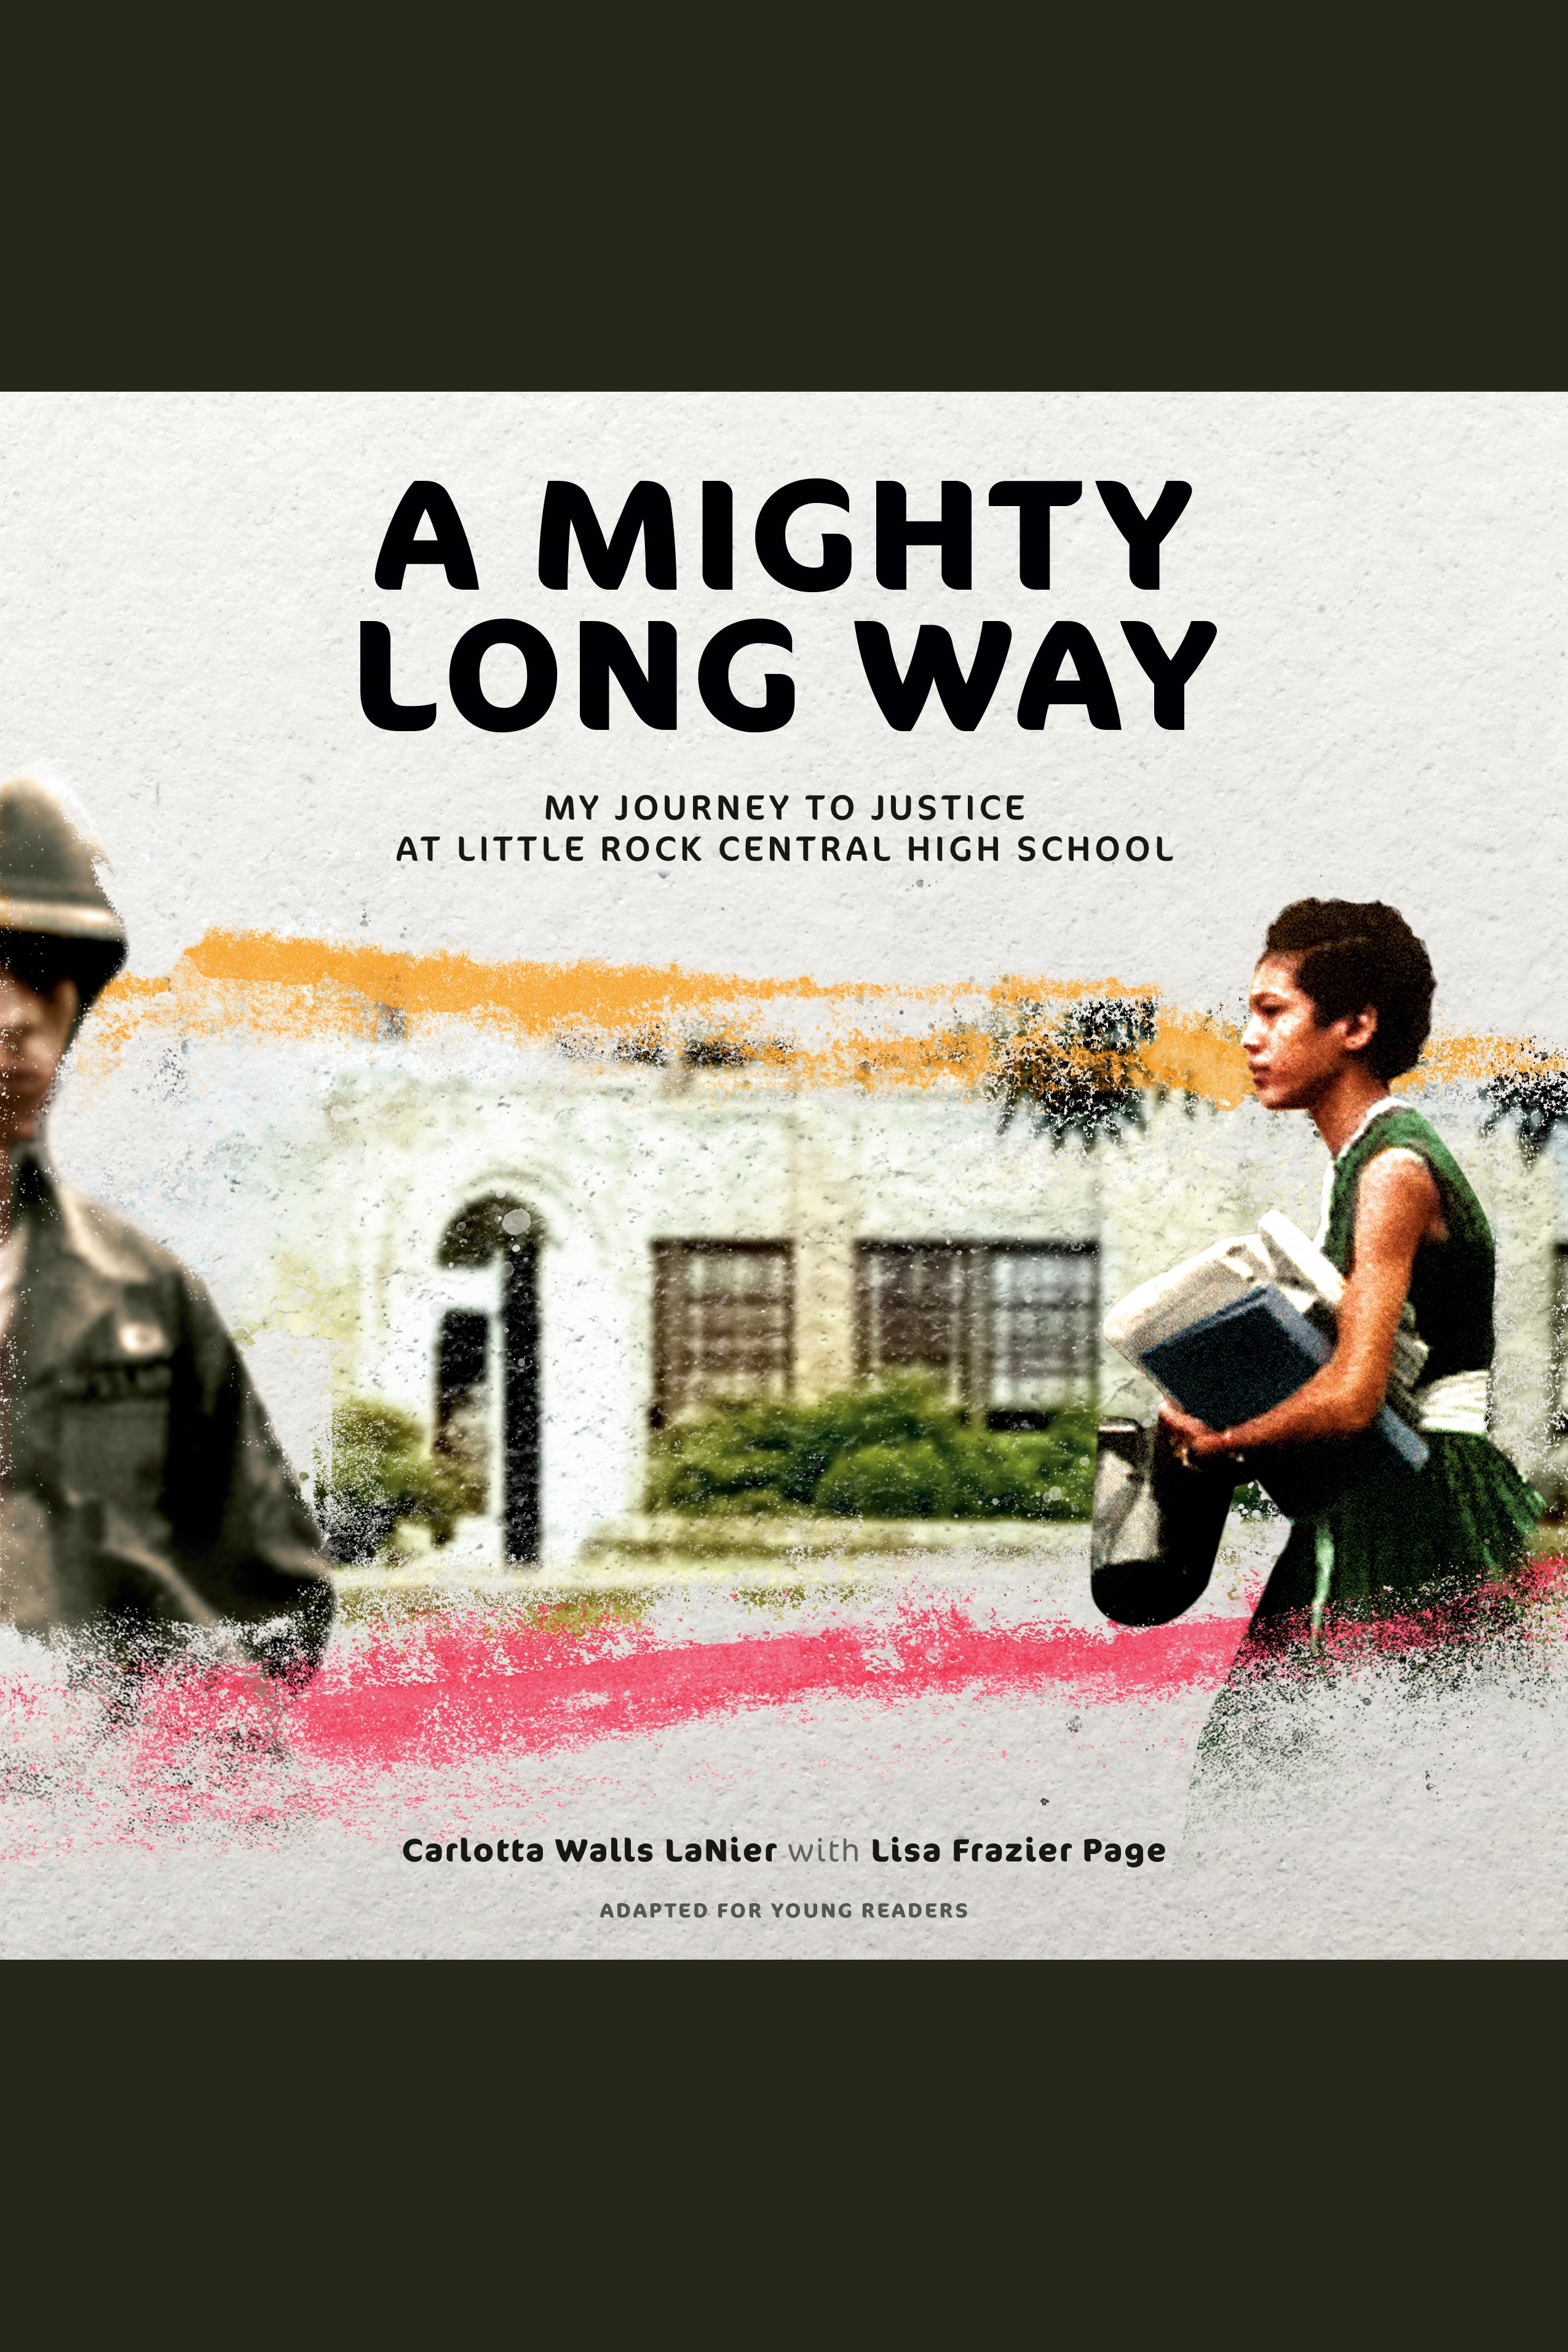 A Mighty Long Way (Adapted for Young Readers) My Journey to Justice at Little Rock Central High School cover image